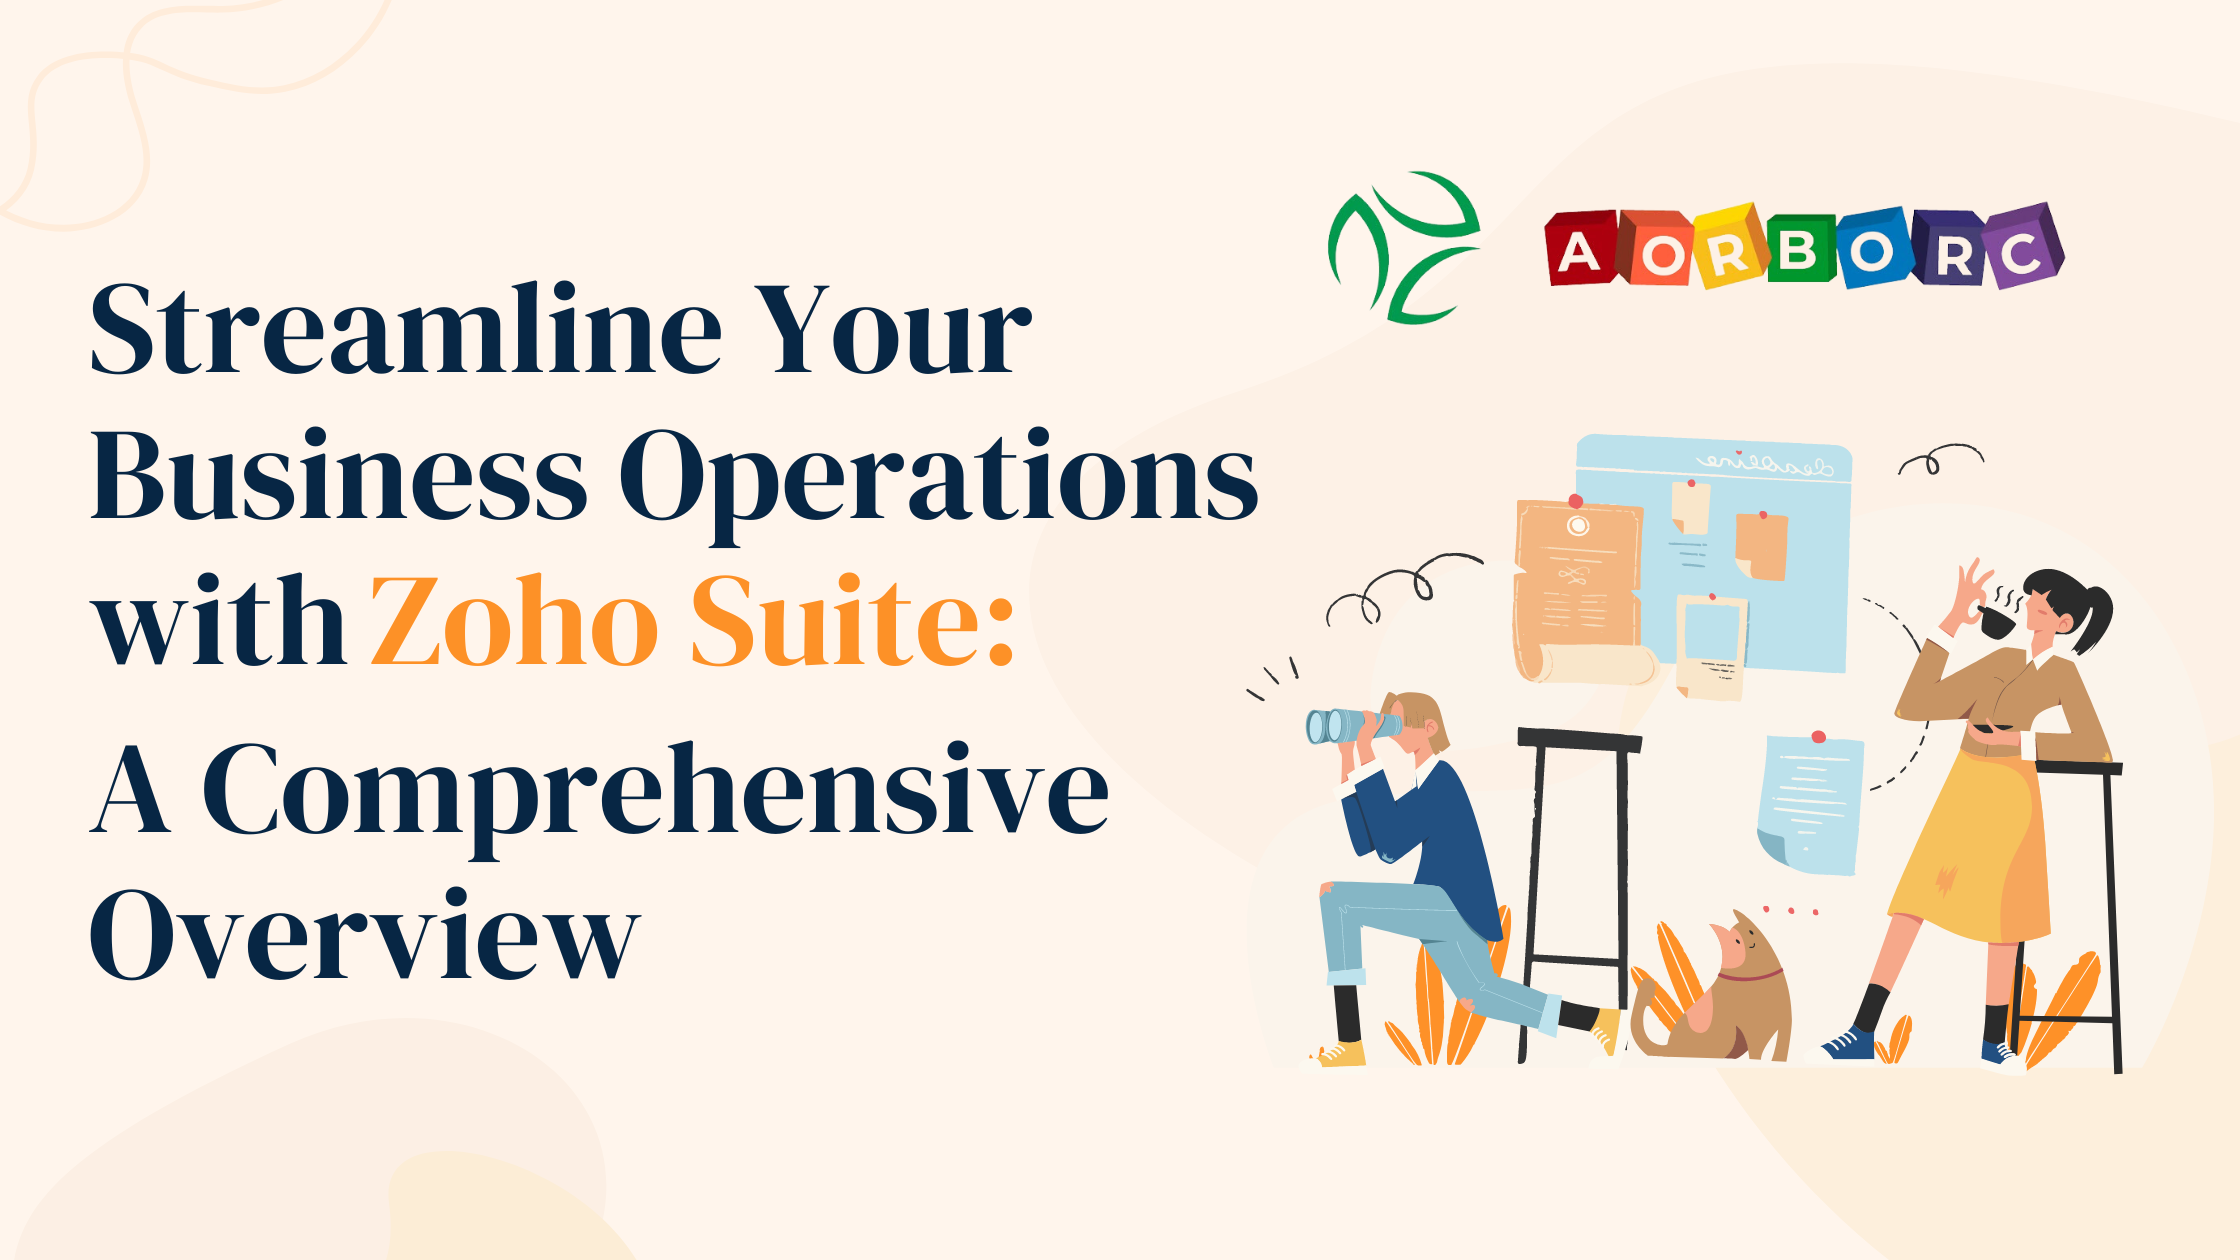 Streamline Your Business Operations with Zoho Suite: A Comprehensive Overview